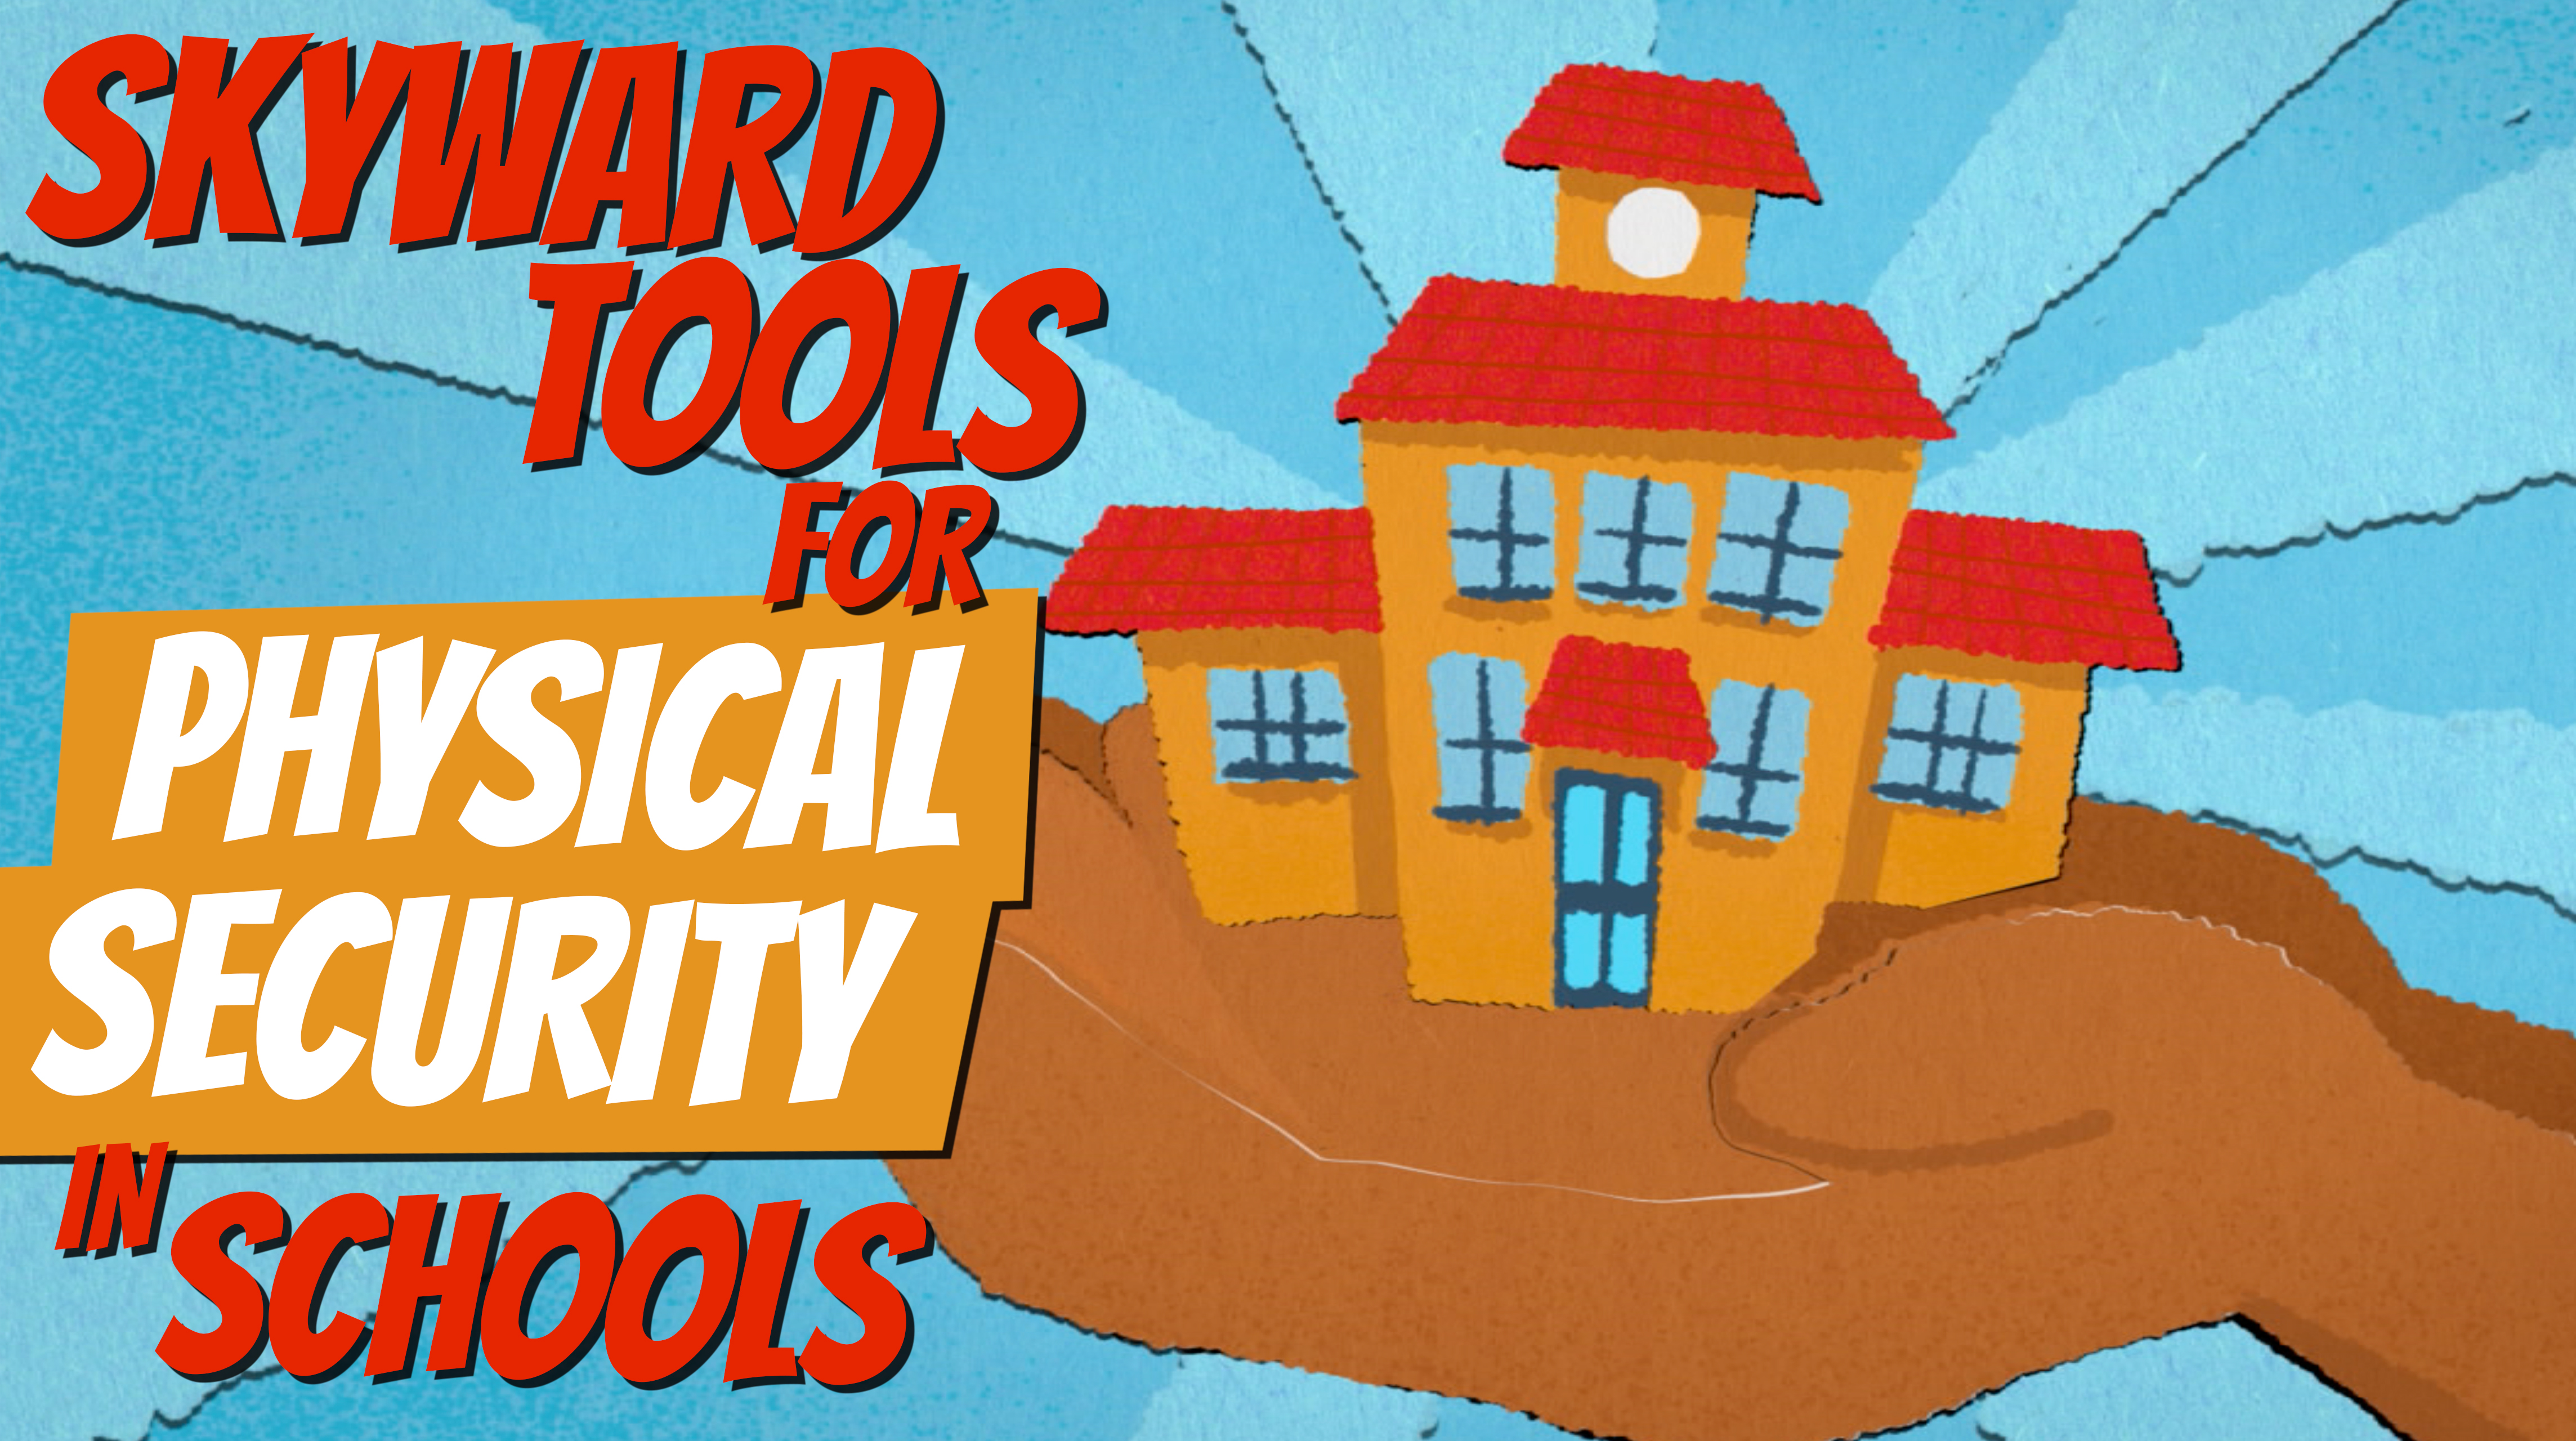 7 Skyward Tools to Make School Safer (SMS 2.0)